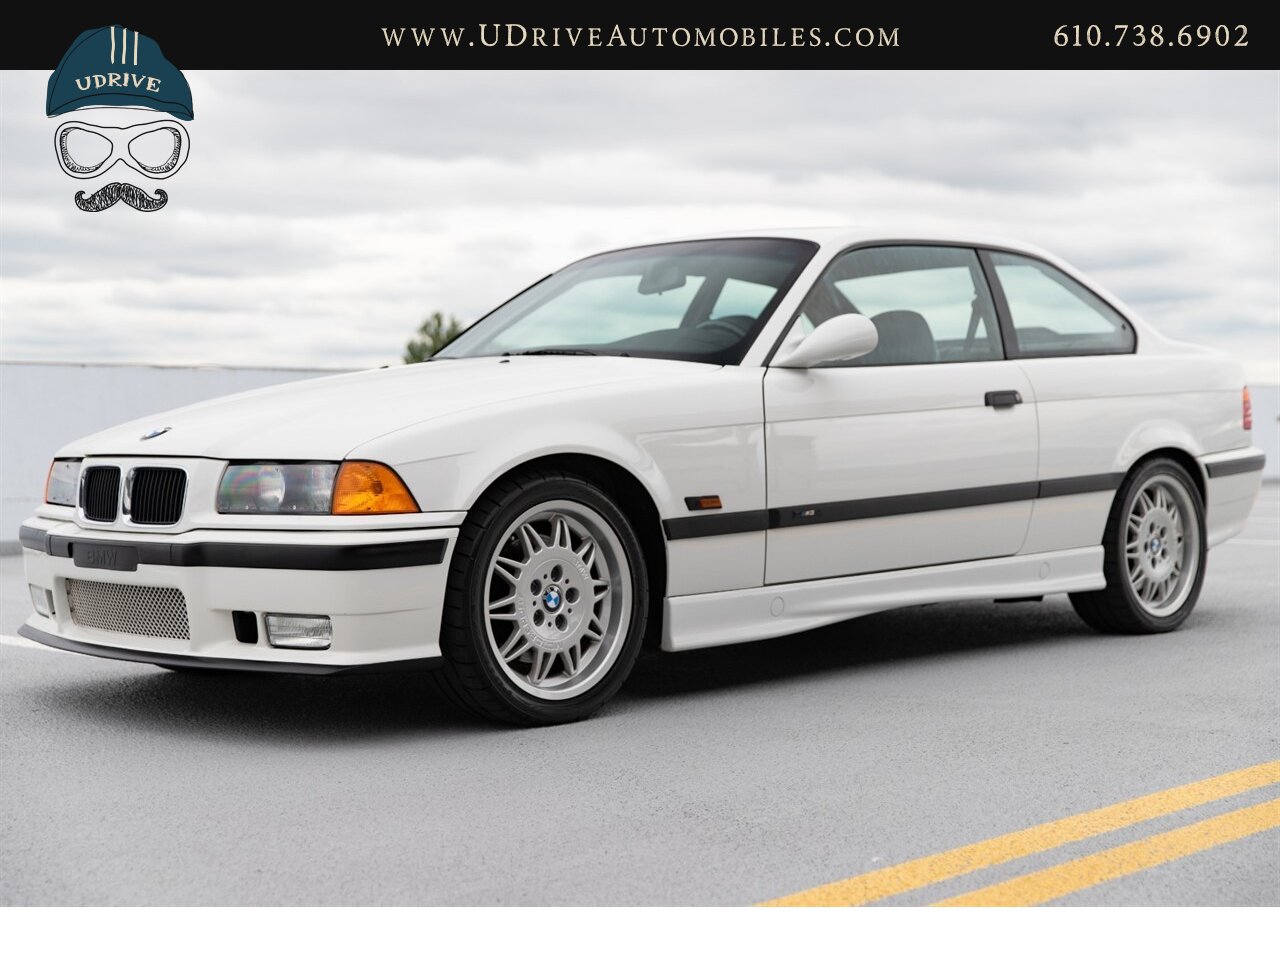 1995 BMW M3 E36 Alpine White over Black Vader Seats  5 Speed - Photo 8 - West Chester, PA 19382